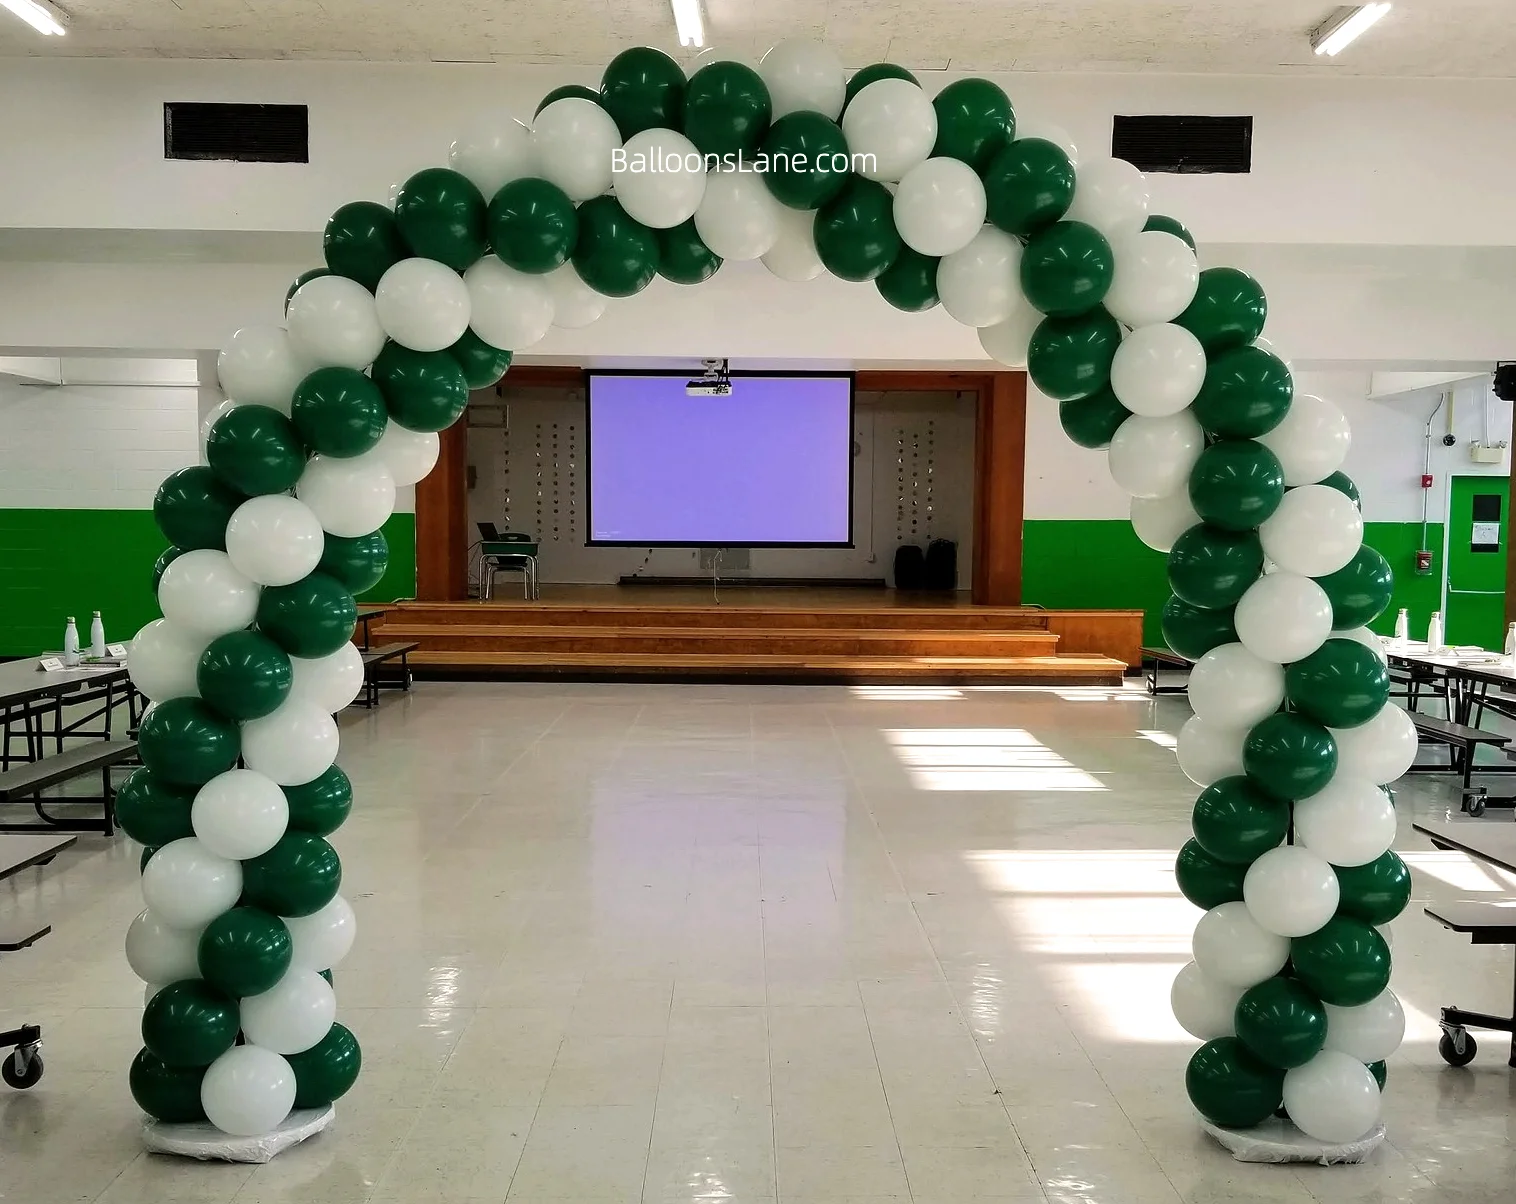 Arch made of green and white latex balloons.